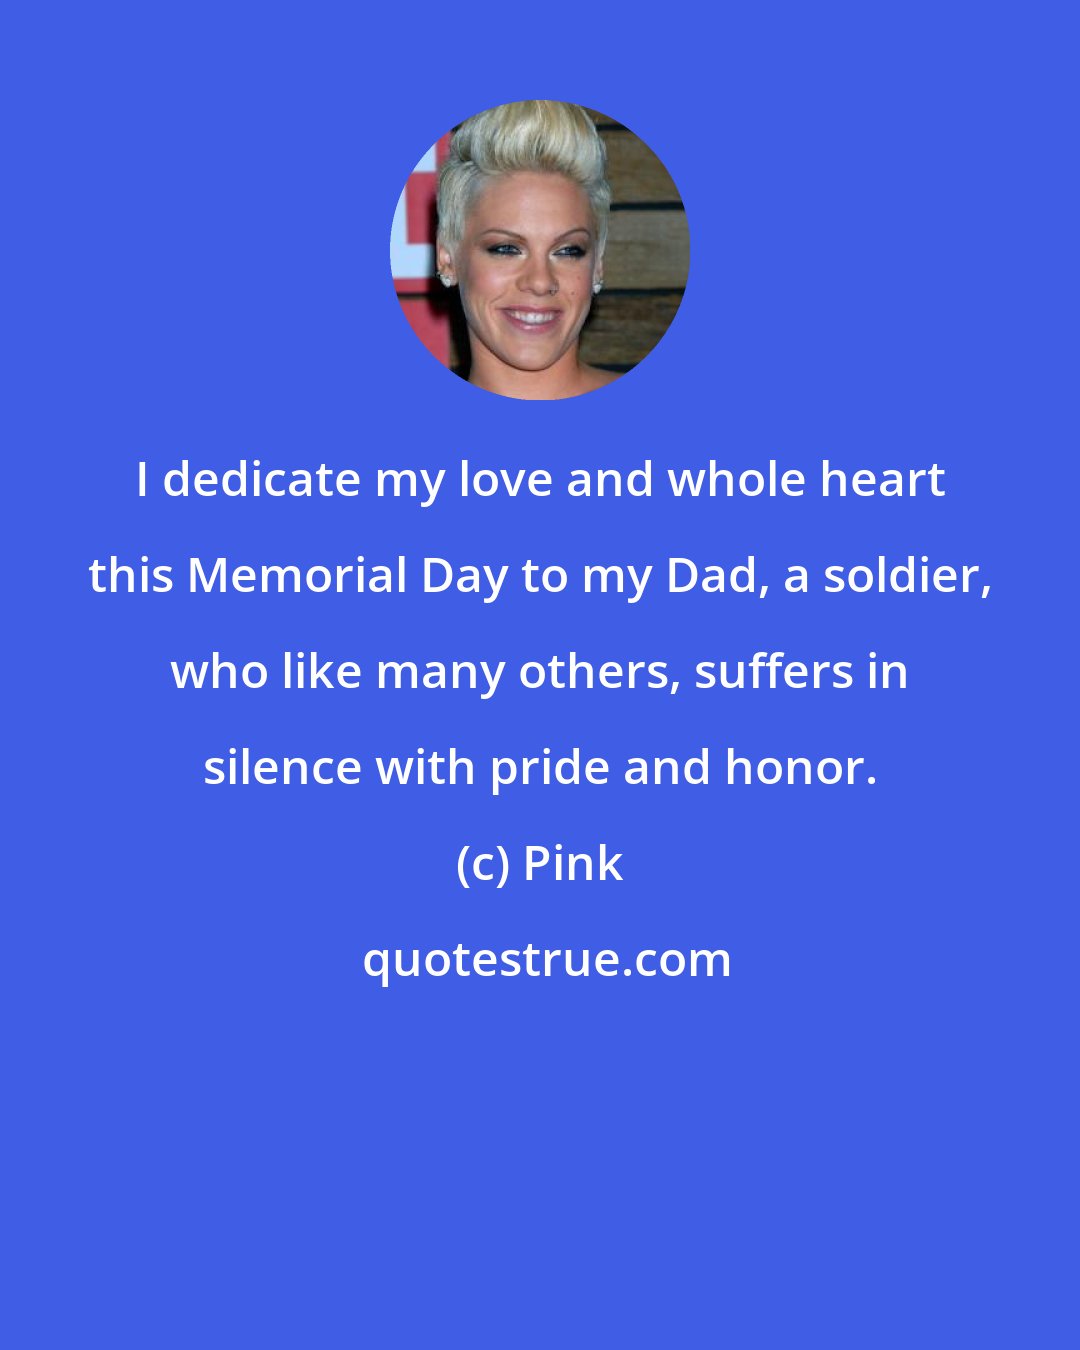 Pink: I dedicate my love and whole heart this Memorial Day to my Dad, a soldier, who like many others, suffers in silence with pride and honor.